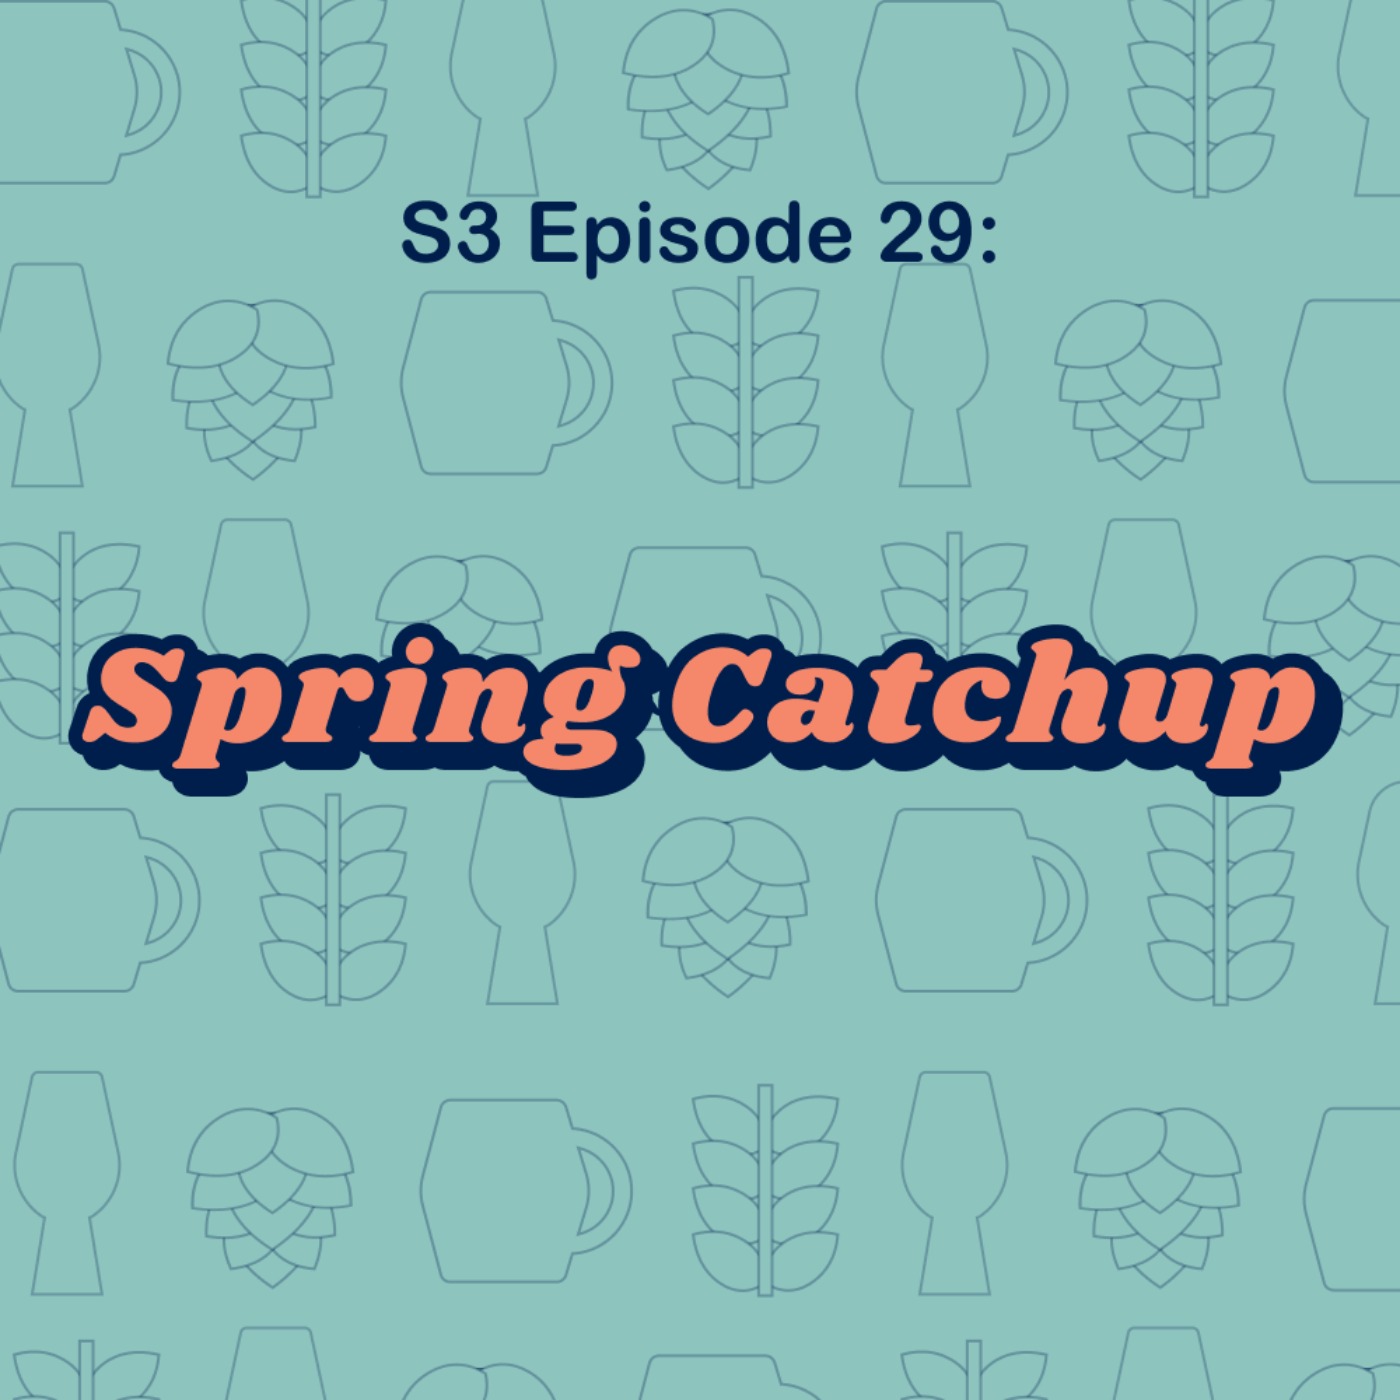 Spring Catchup